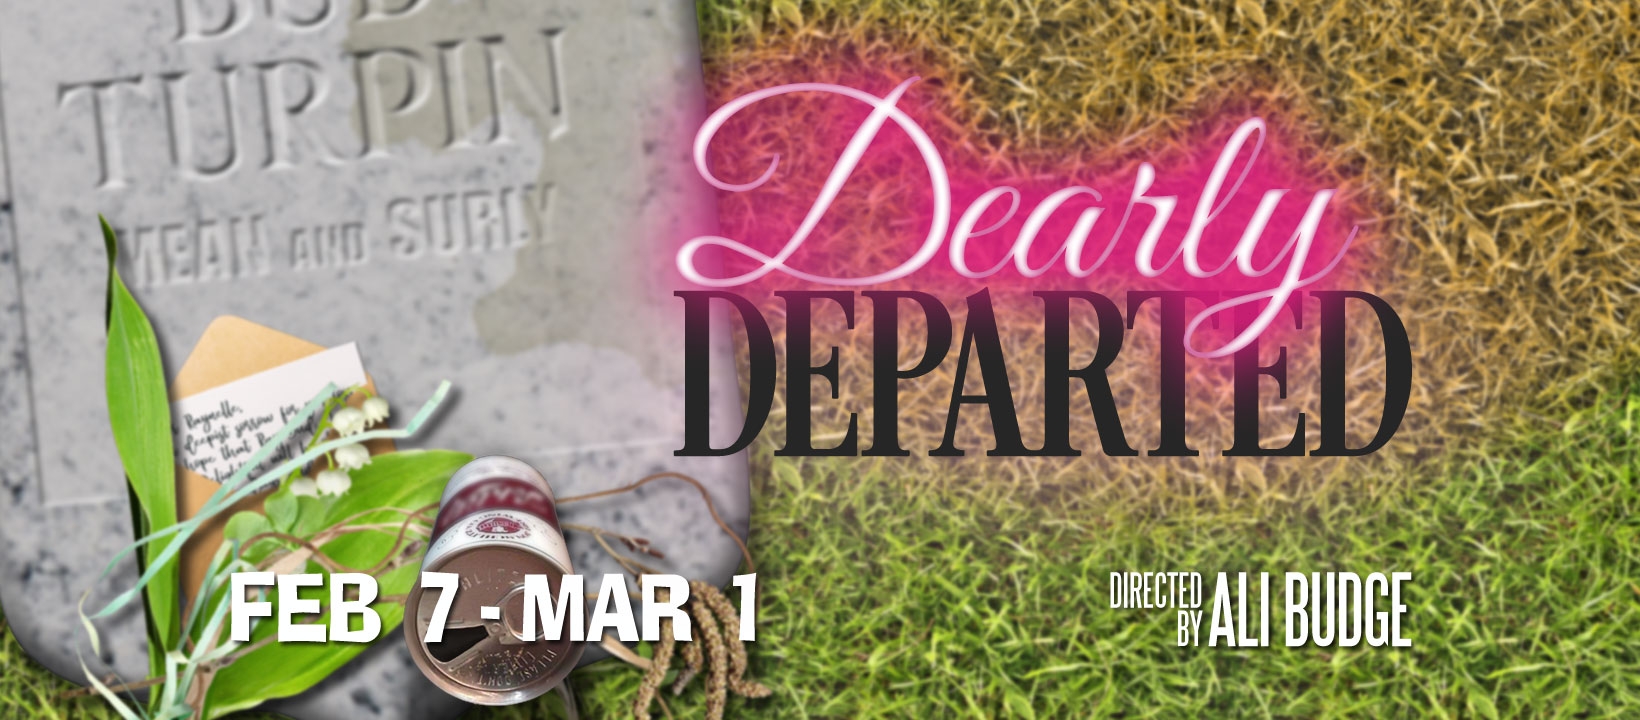 Dearly Departed by David Bottrell and Jessie Jones